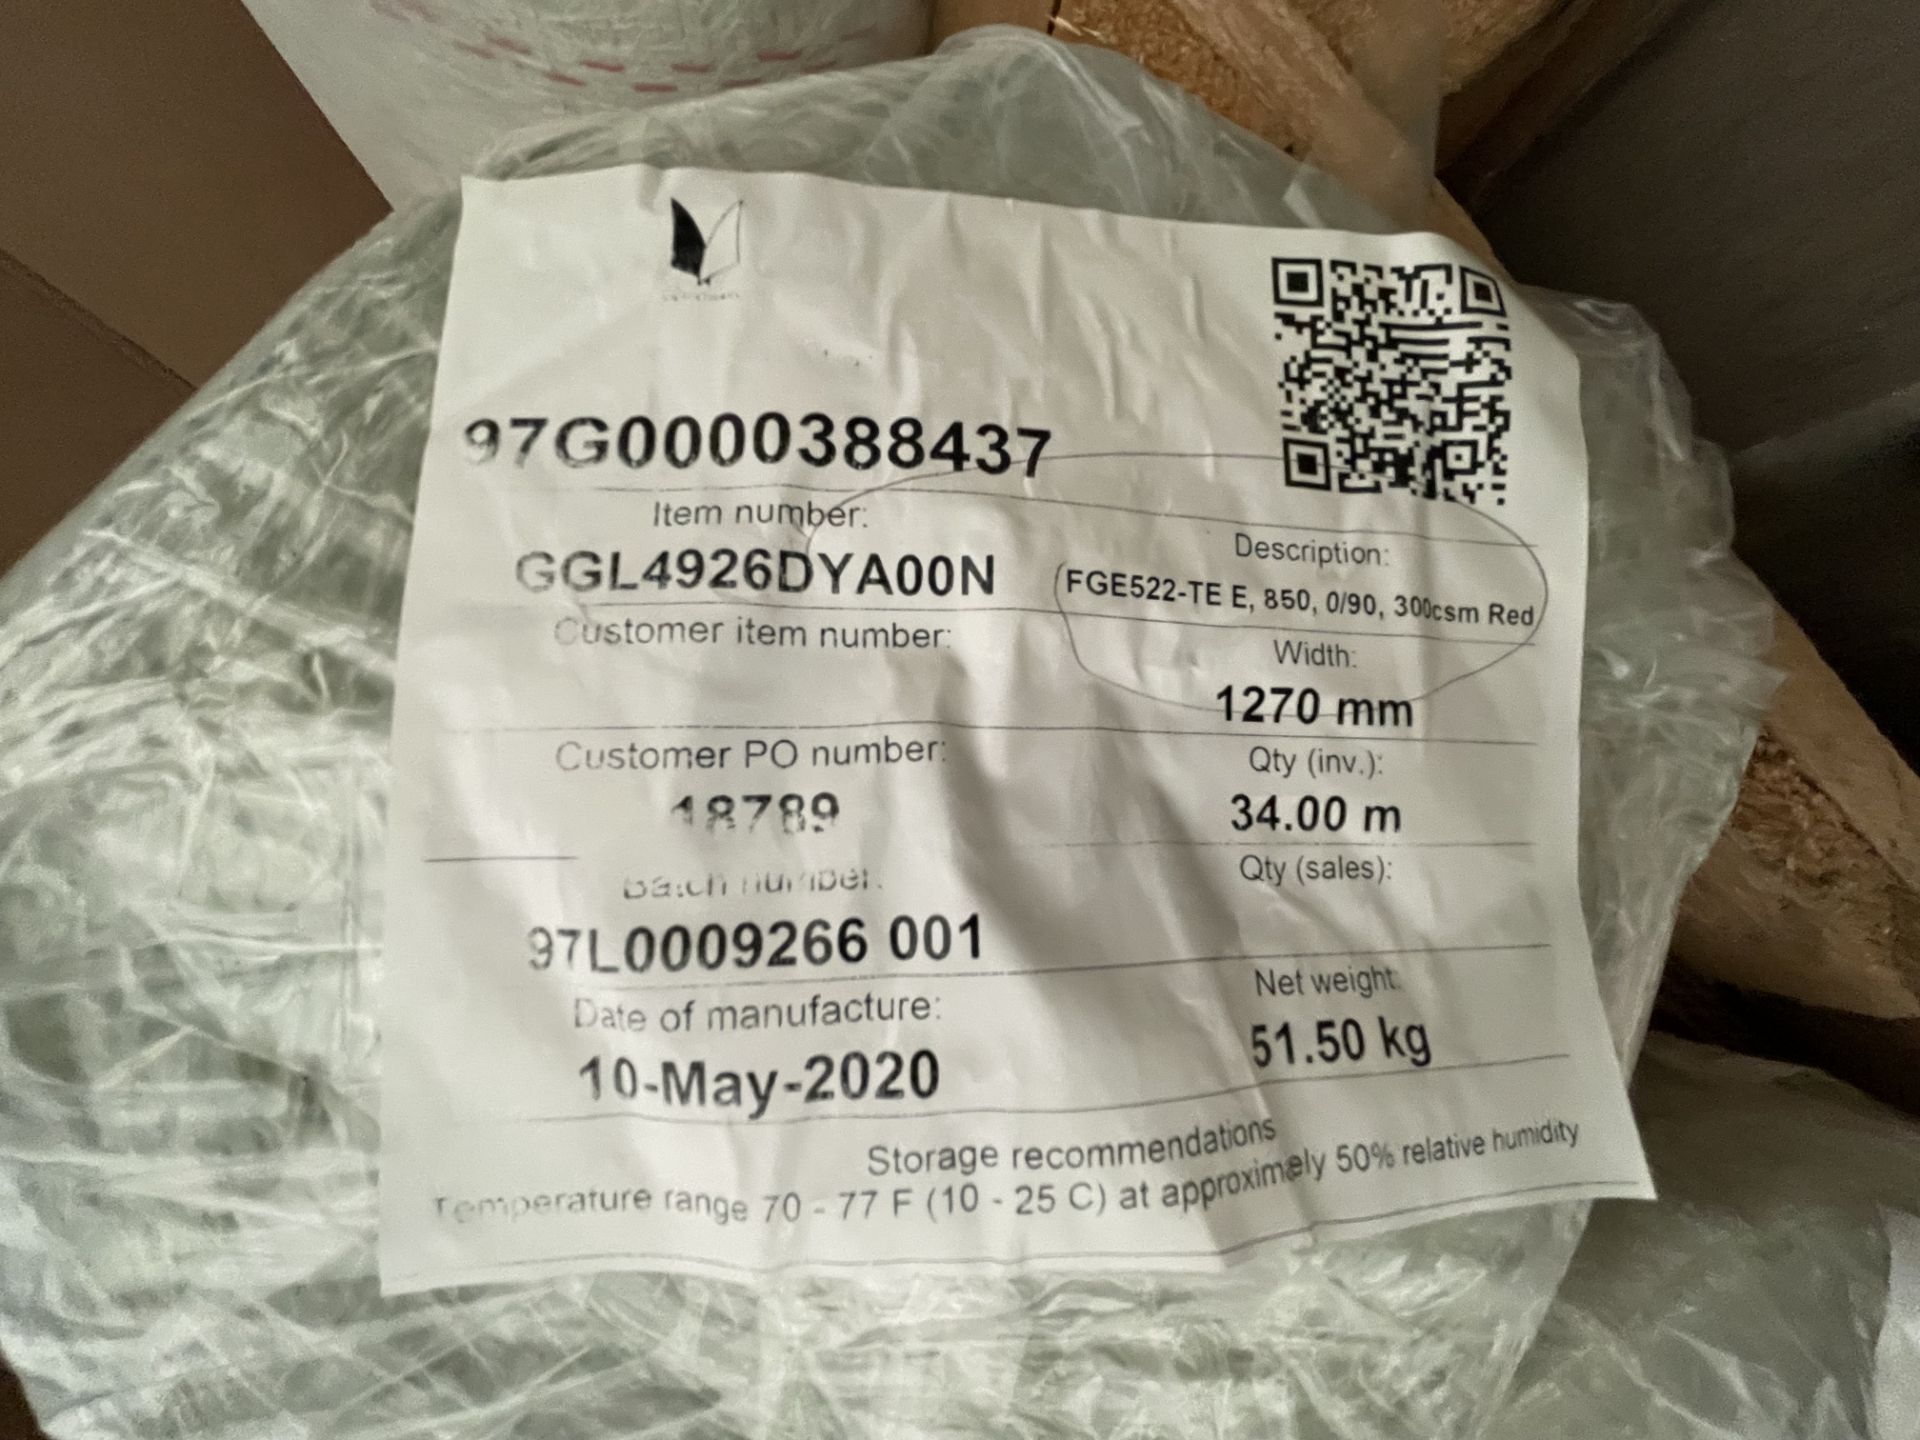 Pallet of FGE522-TE E 850 0/90 300csm Red, Date of Manufacture 10-05-2020 - Image 2 of 2